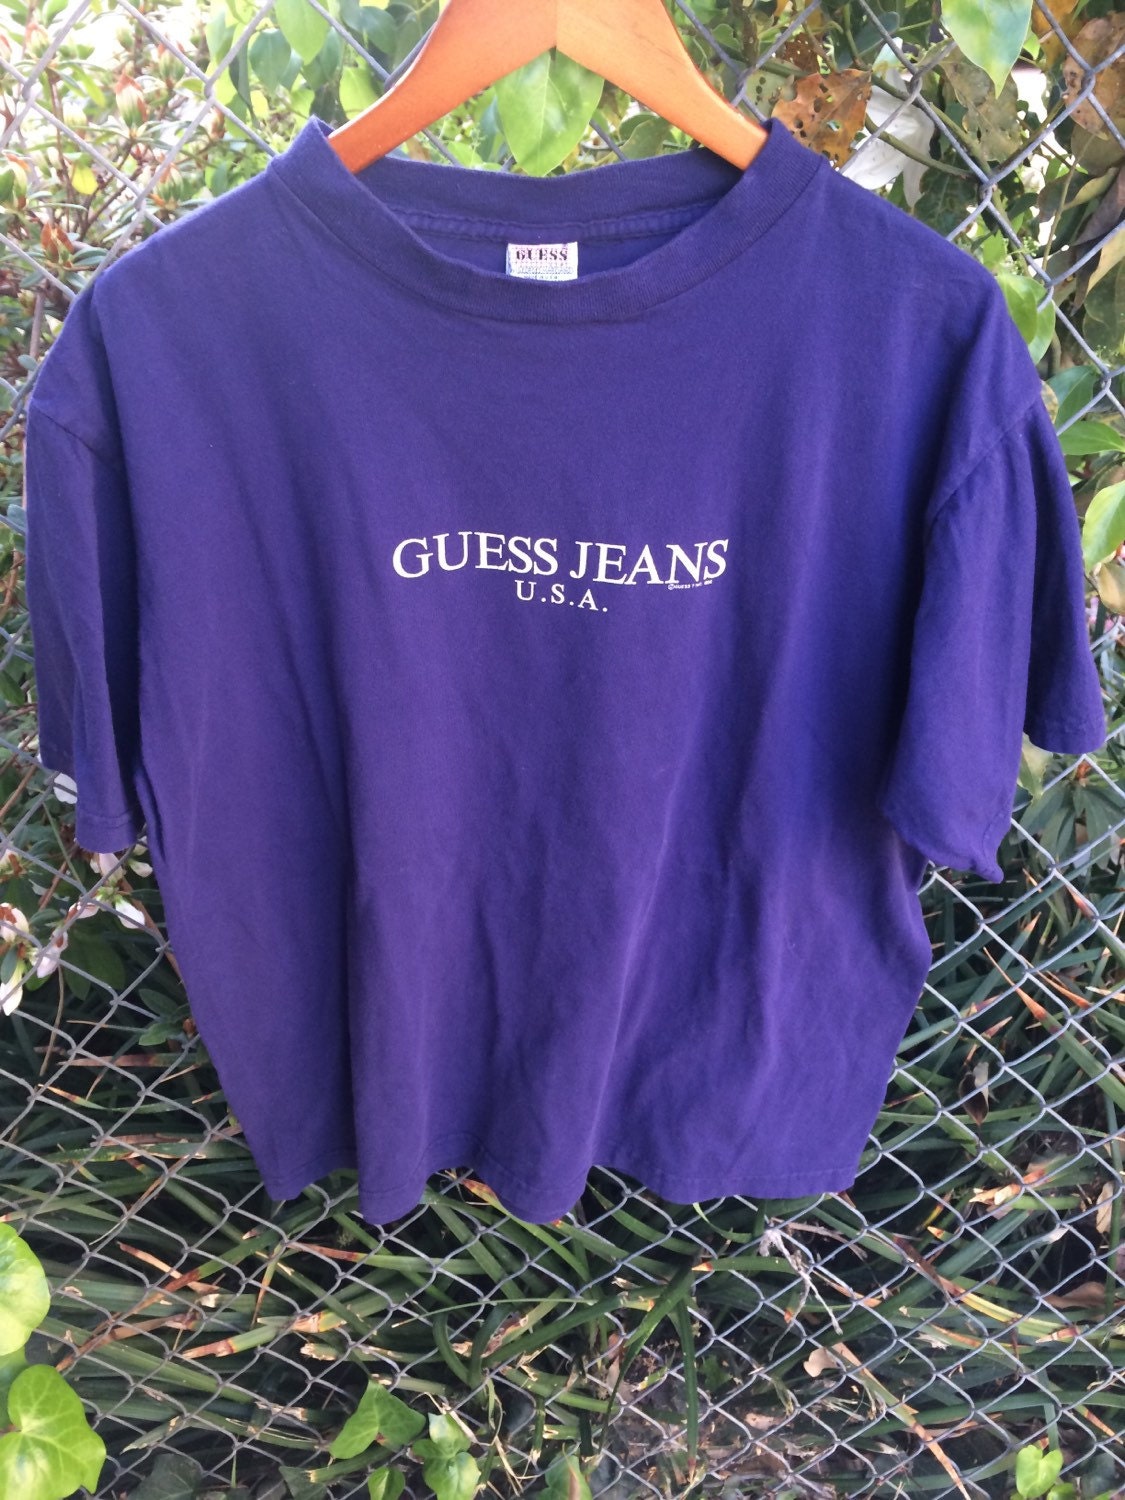 Vintage 1992 Guess Jeans USA  Classic Logo T Shirt Made in the